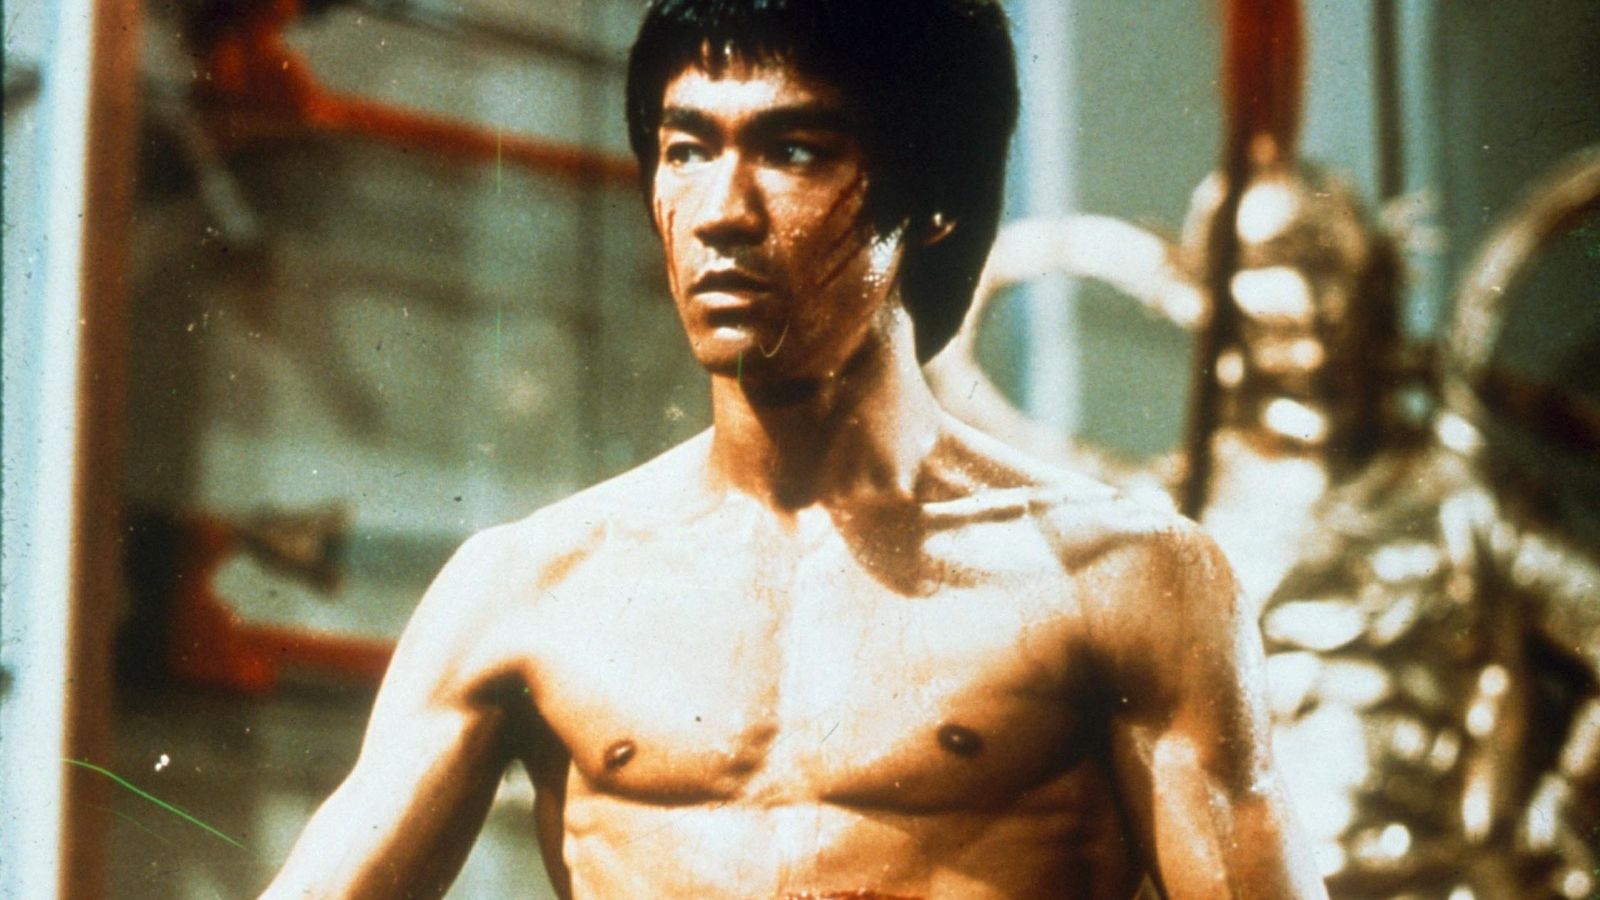 Bruce Lee may have died from drinking too much water | Ents & Arts News |  Sky News